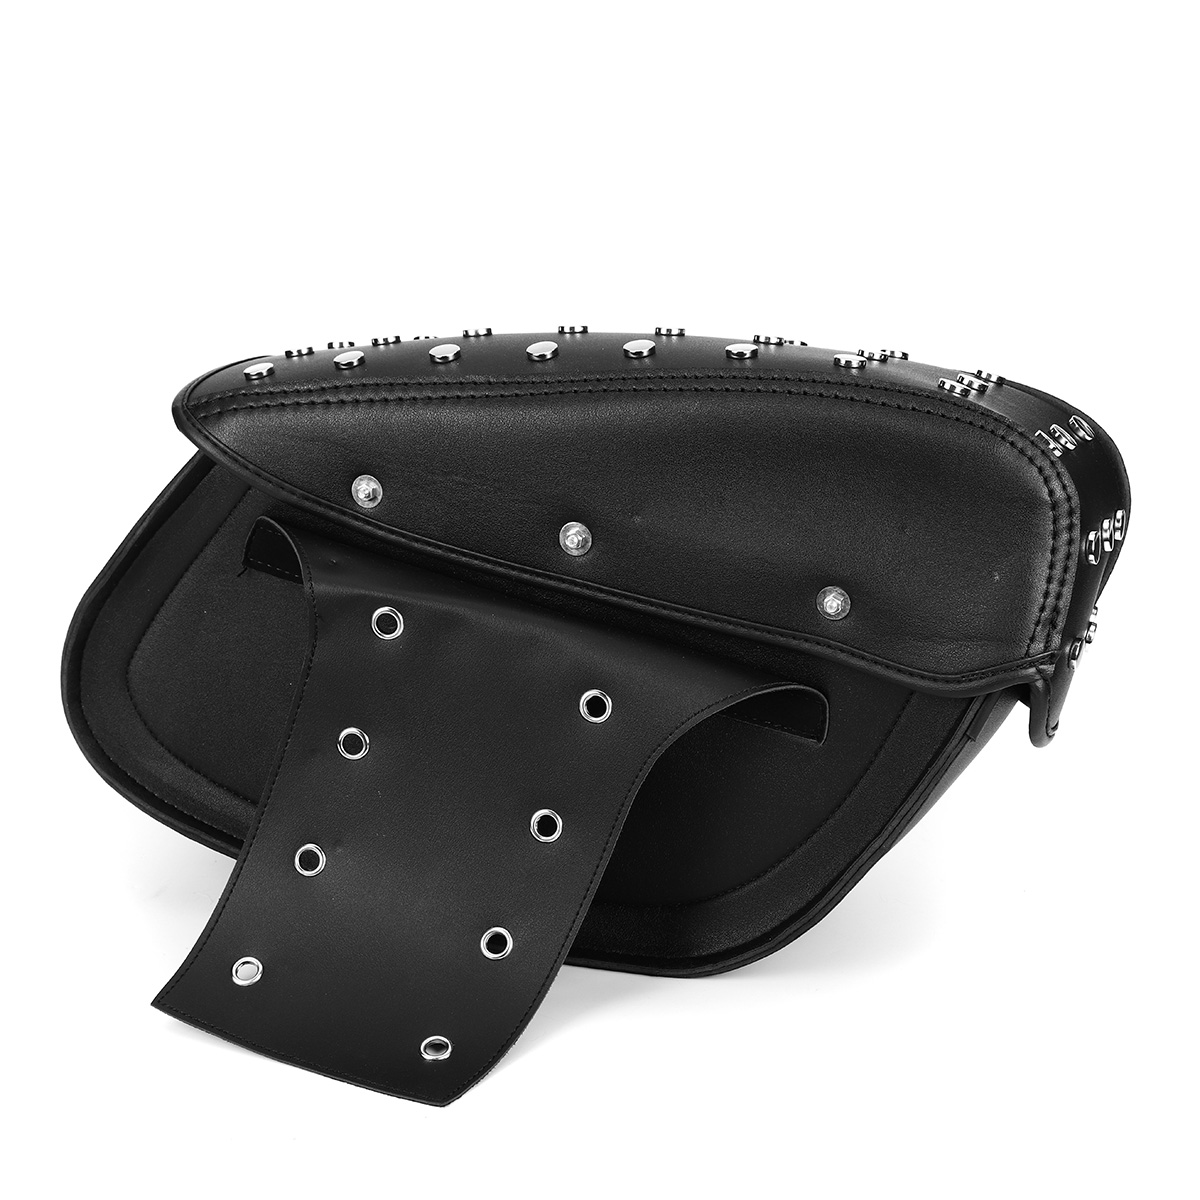 Motorcycle pu leather saddlebags side bag for harley sportster 1200xl ...